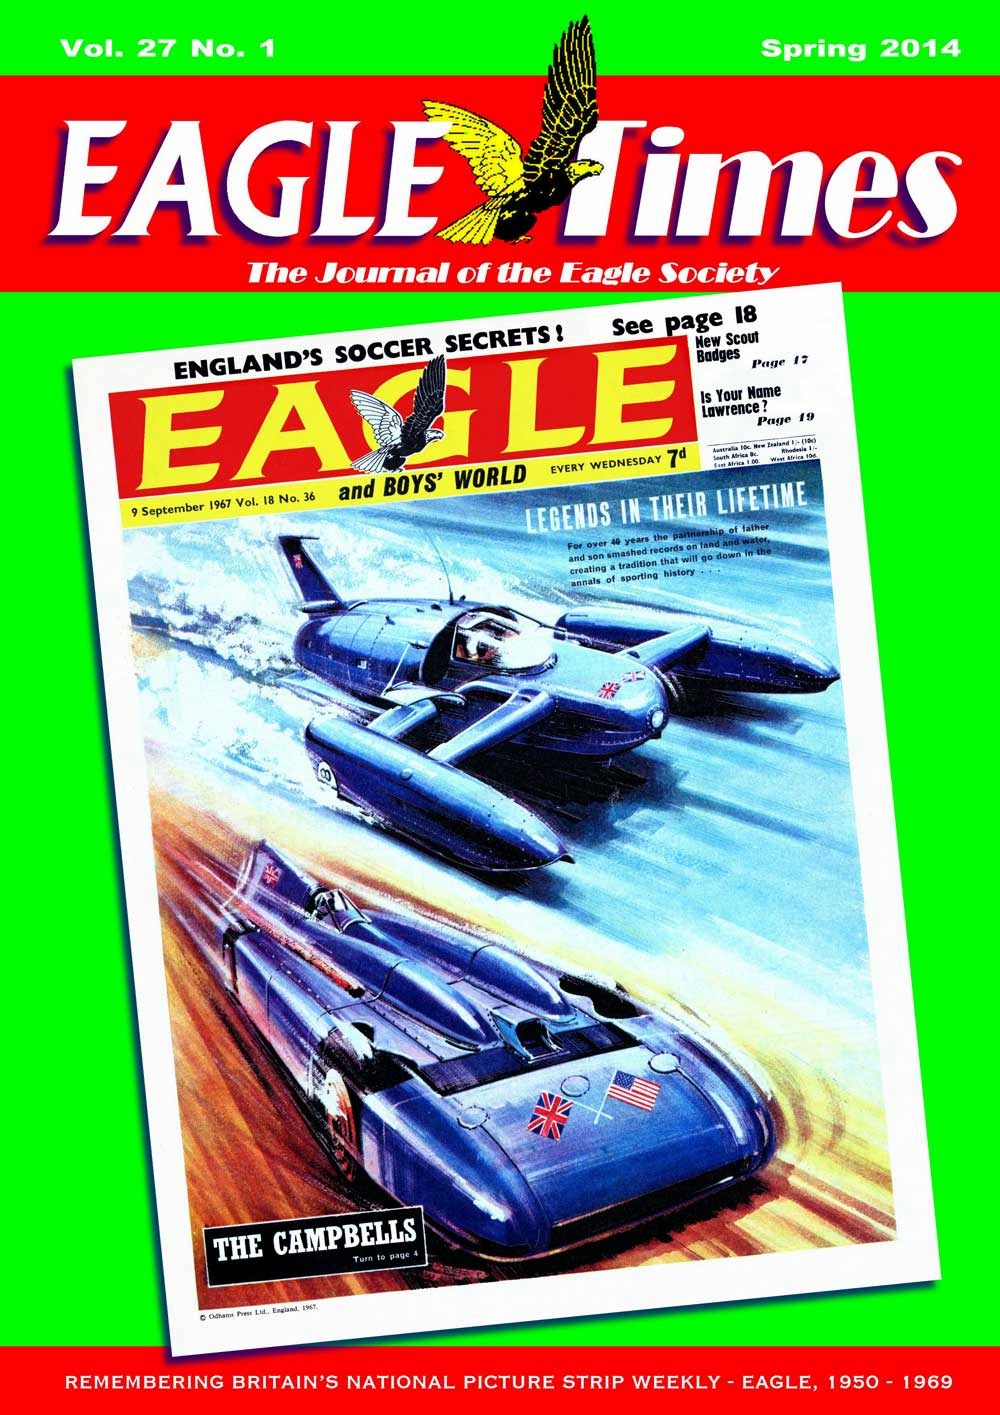 Eagle Times Volume 27 Number One - Cover